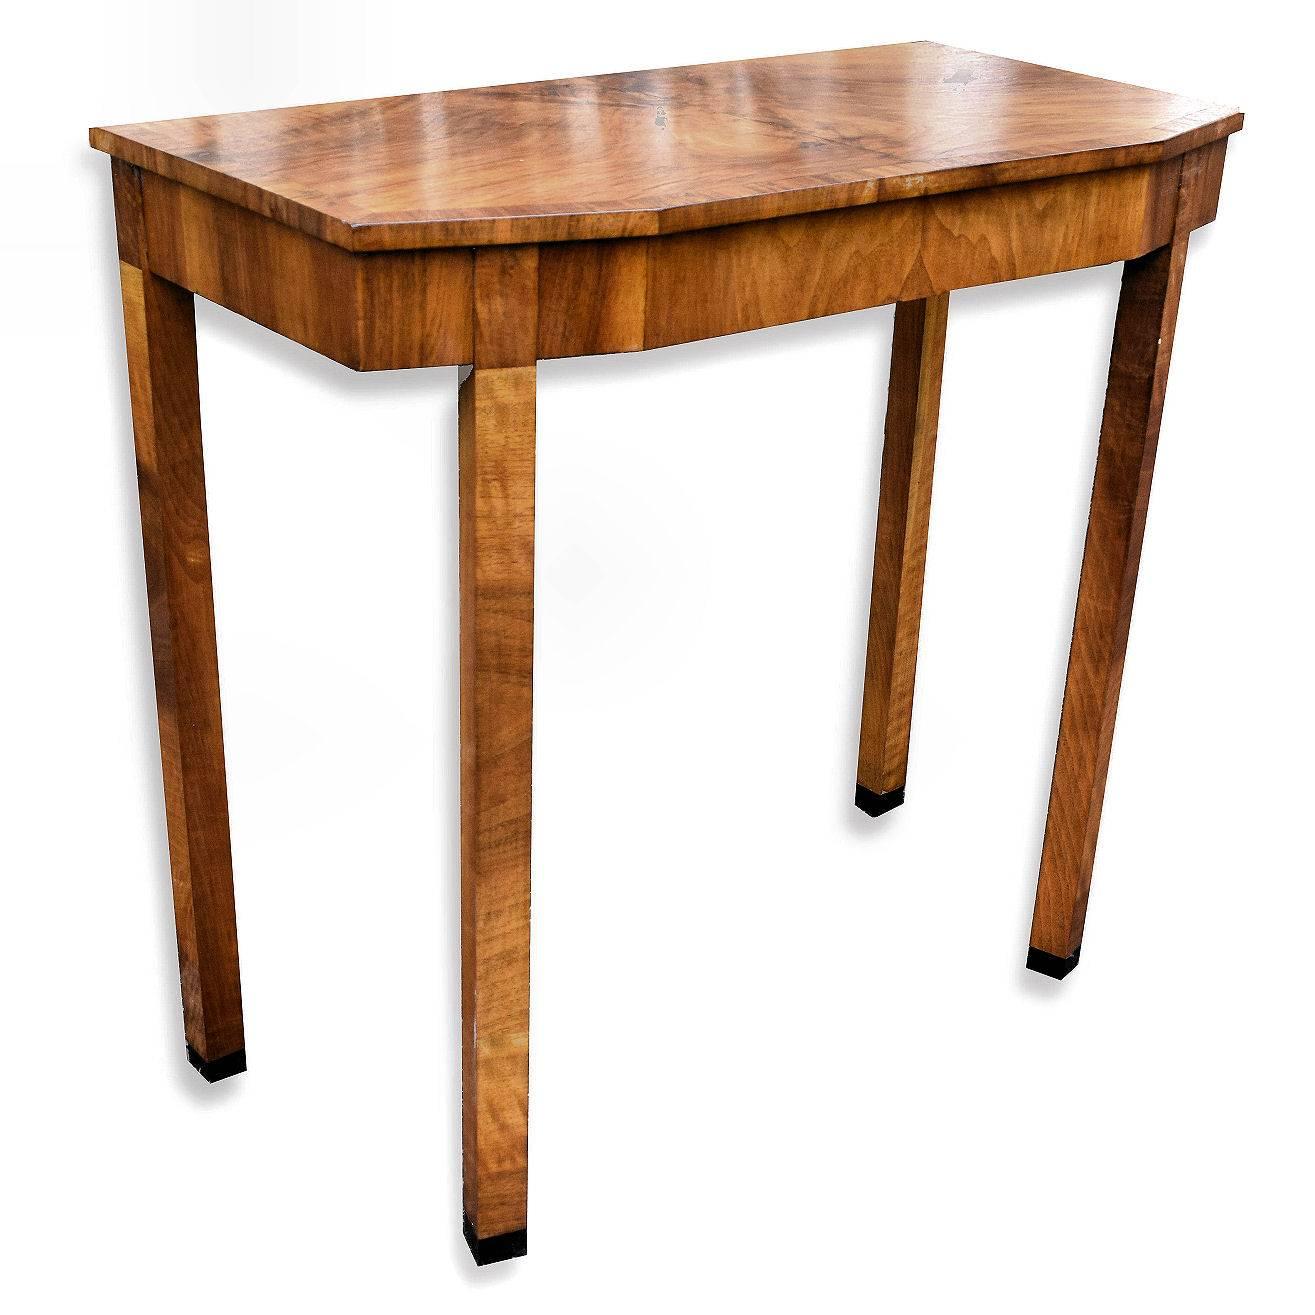 For your consideration is this English, 1930s Art Deco console table in beautiful walnut veneers. Ideal size for modern use, either to use as focal point for a room with either flowers or a sculpture or perhaps more traditionally as a telephone